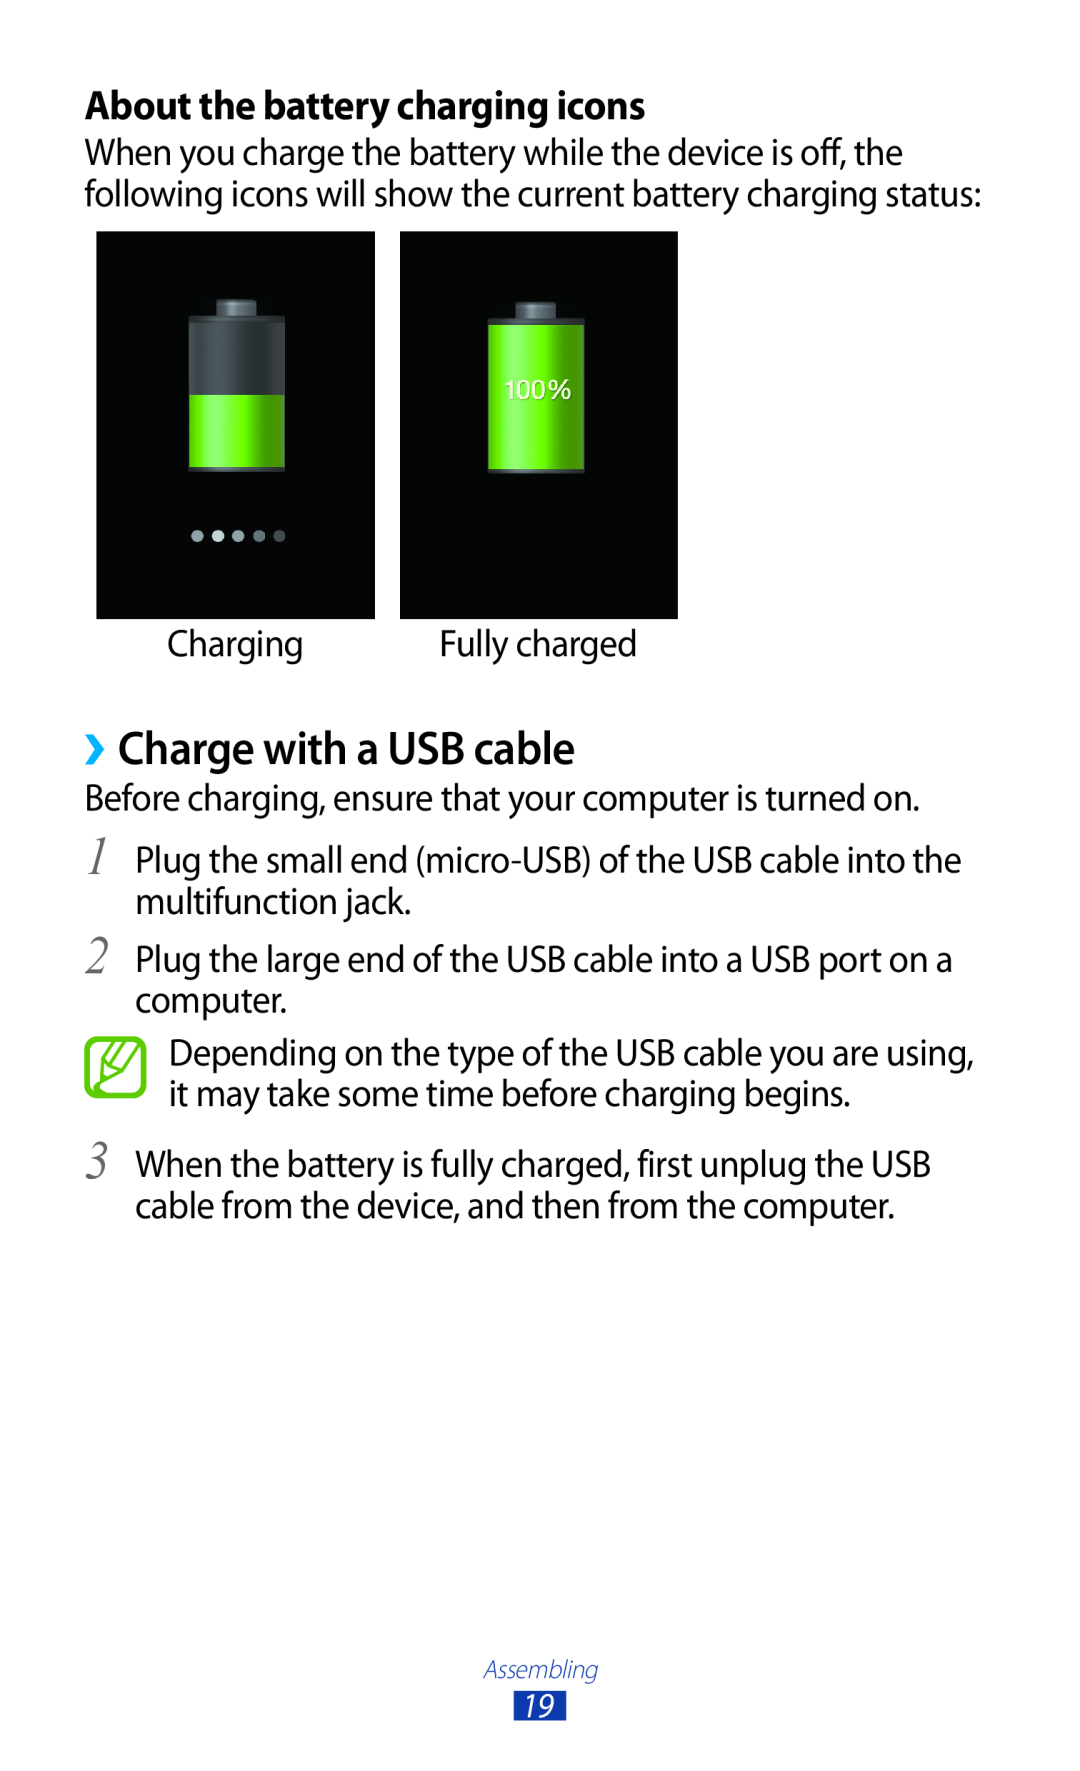 Samsung GT-S7560ZKAFTM, GT-S7560ZKAVDR, GT-S7560ZKAPRT manual ››Charge with a USB cable, About the battery charging icons 